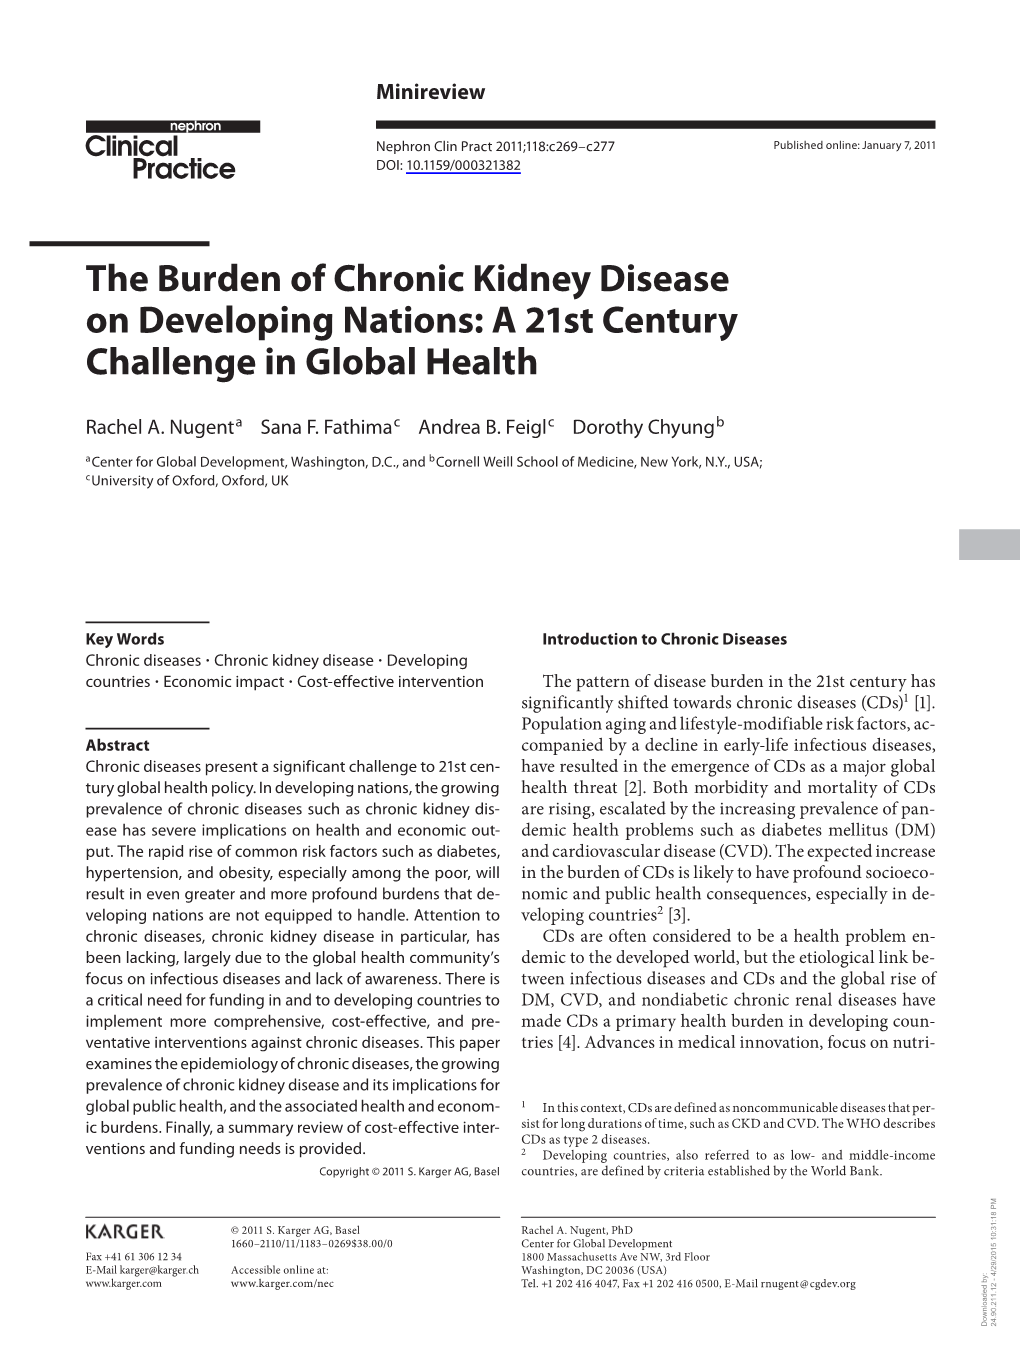 The Burden of Chronic Kidney Disease on Developing Nations: a 21St Century Challenge in Global Health